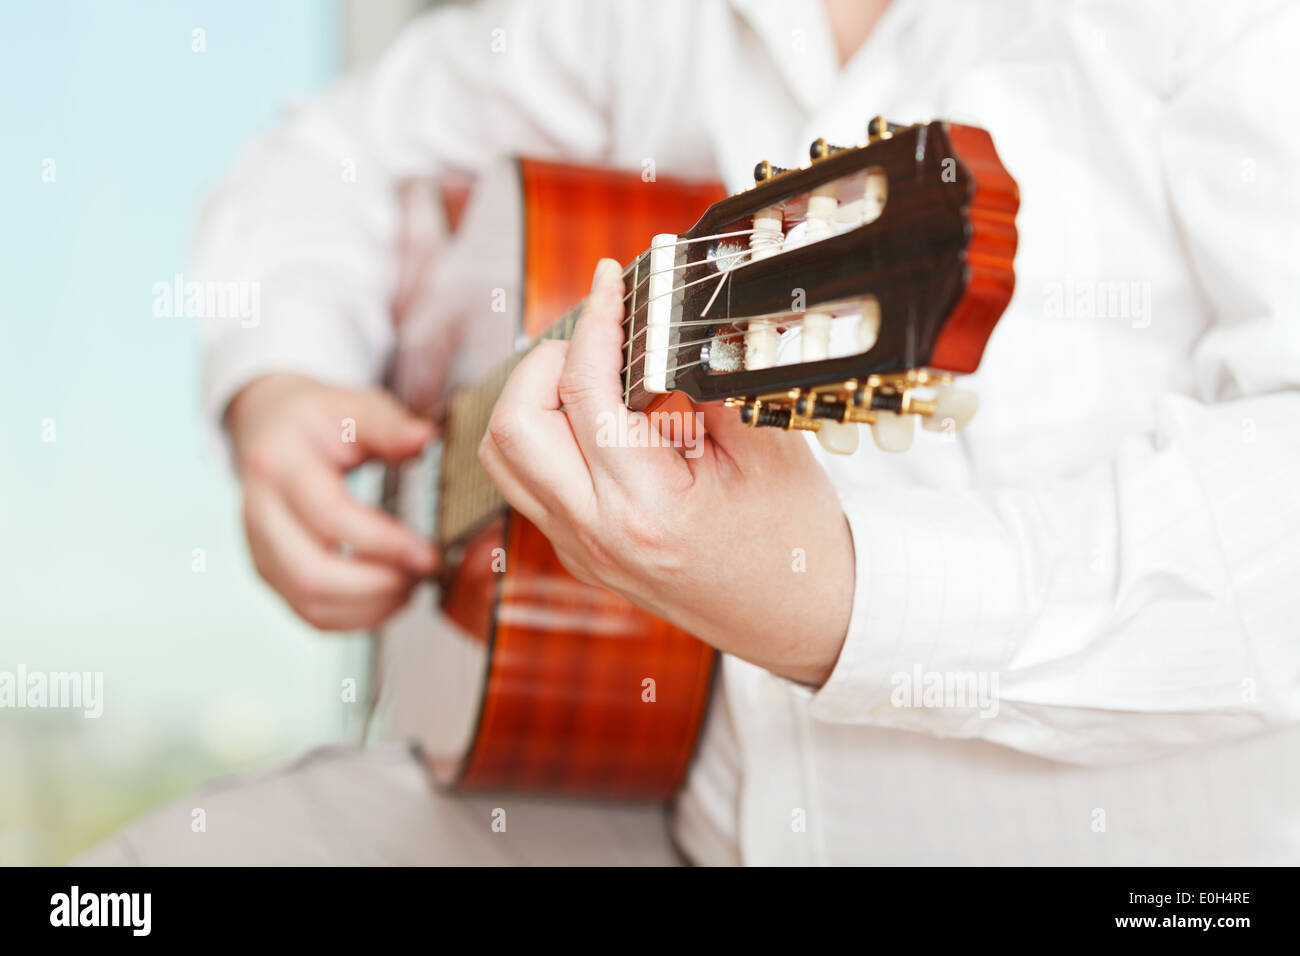 man plays on classical acoustic guitar close up Stock Photo